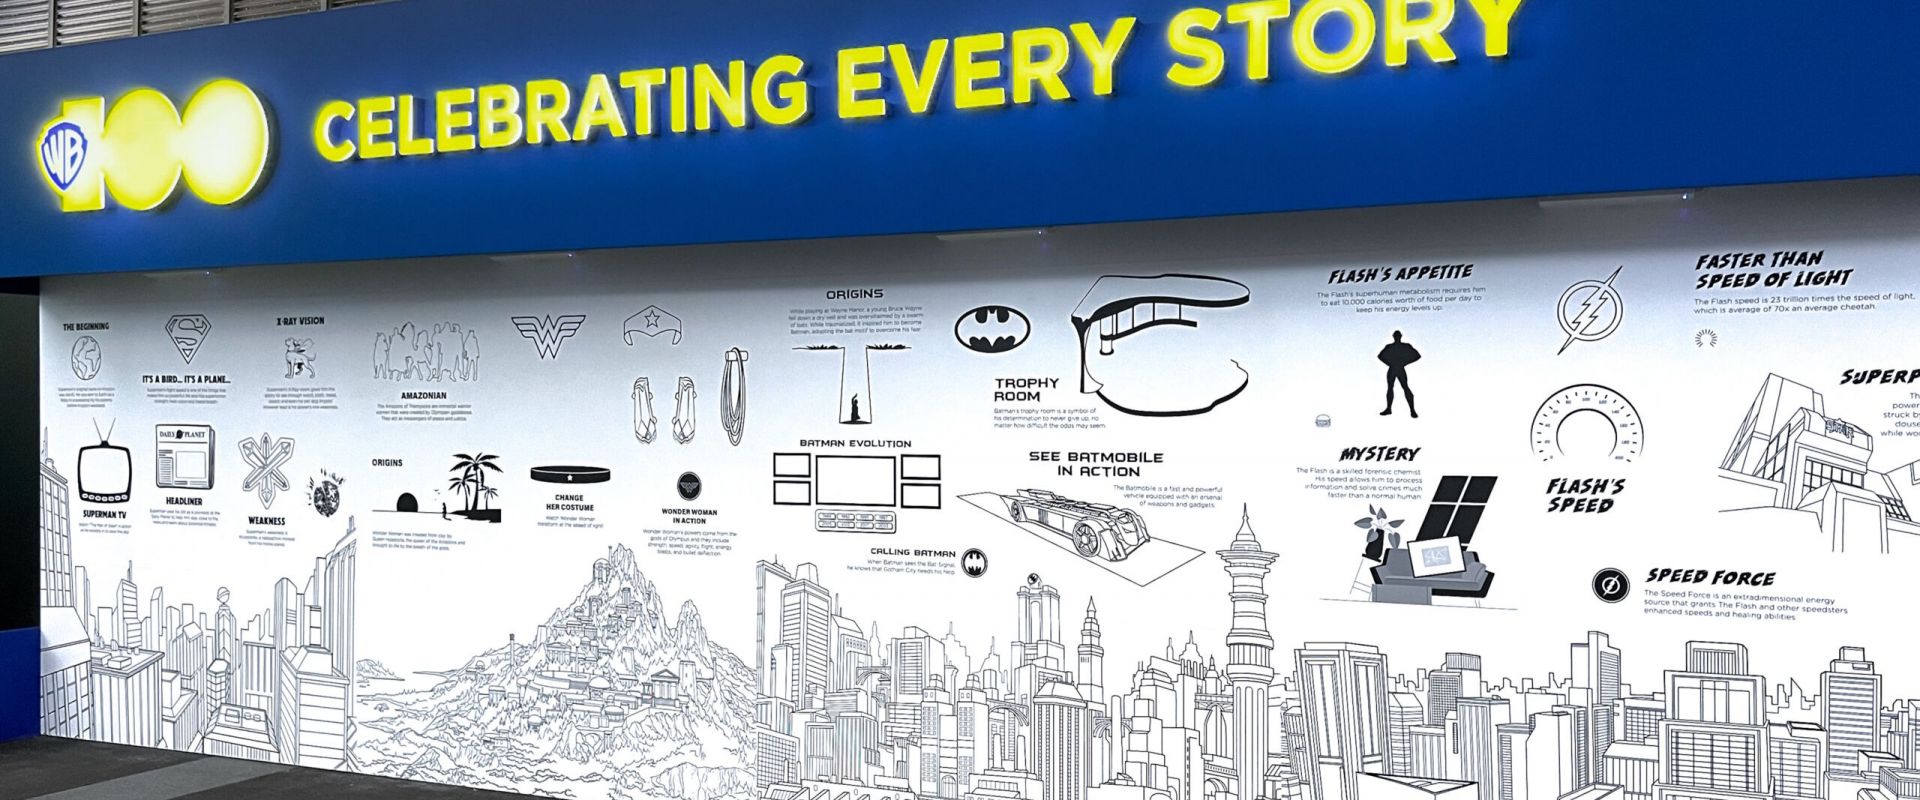 Celebrating every Story - Warner Bros anniversary in Singapore with interactive projection screen